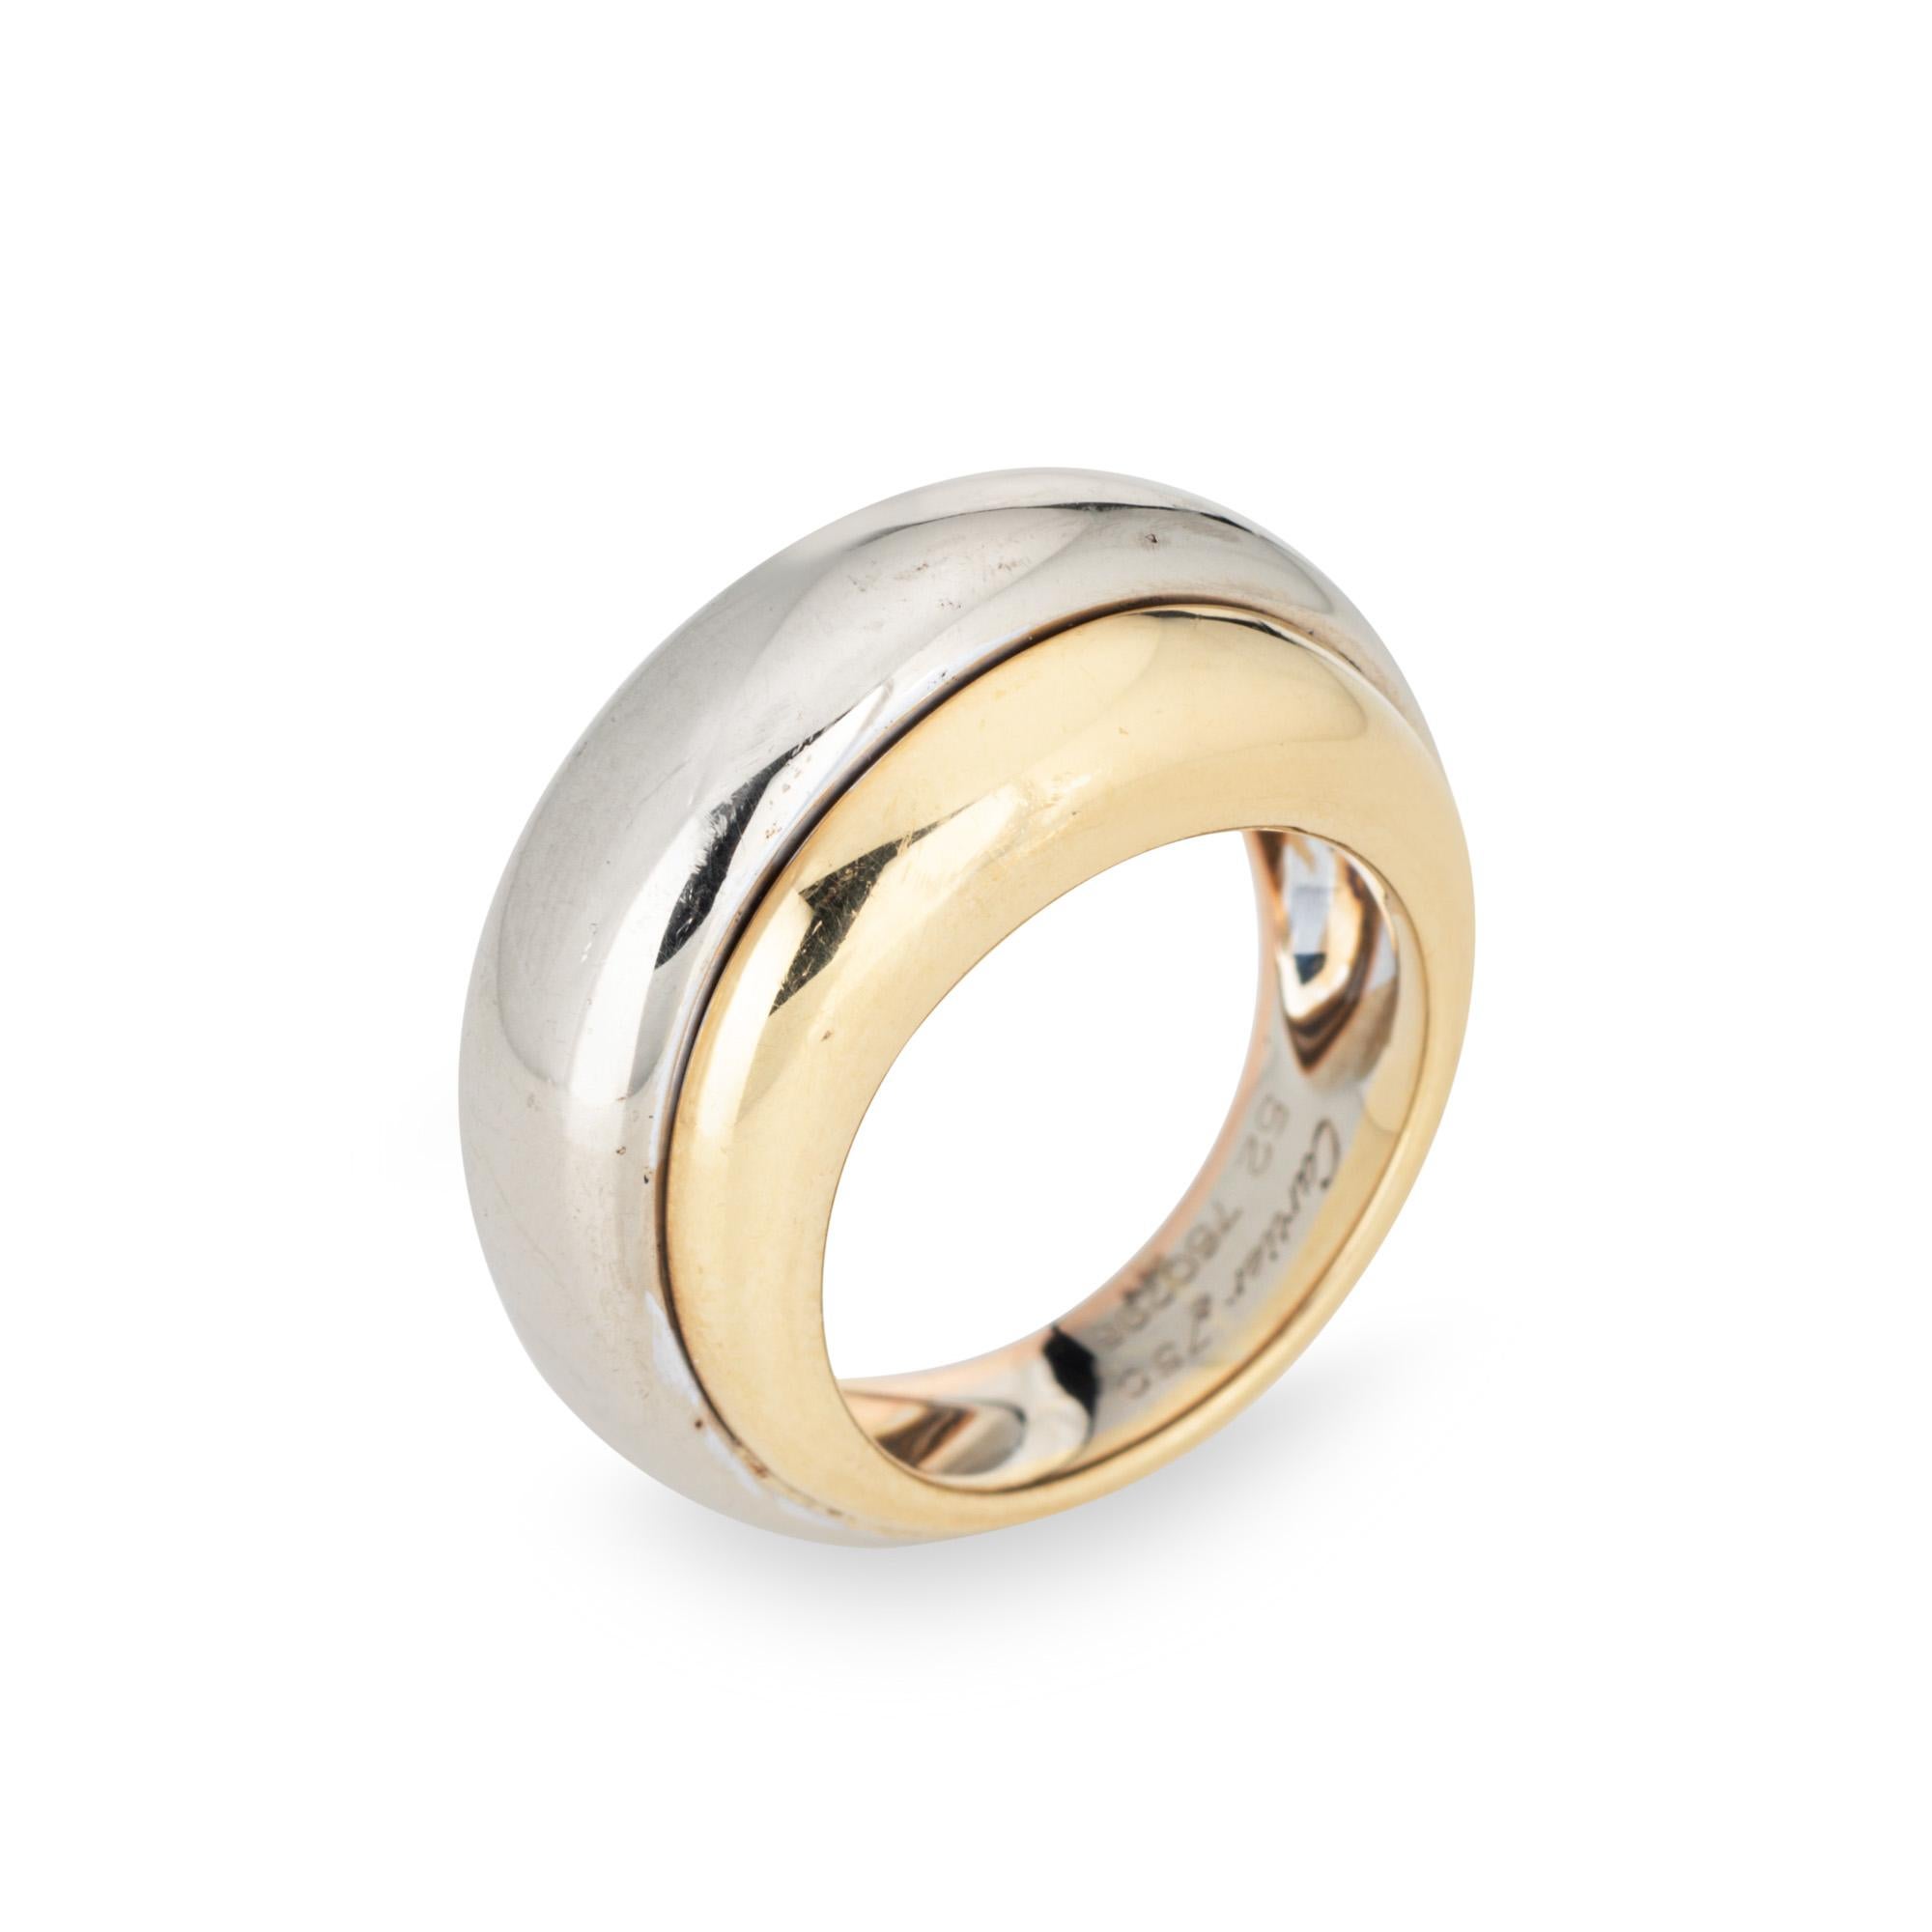 Vintage Cartier Trinity dome ring crafted in 18 karat yellow, rose & white gold (circa 1990s).  

The out of production Cartier Trinity ring features three bands of tri-colored white, yellow and rose gold. The ring is great worn alone or stacked